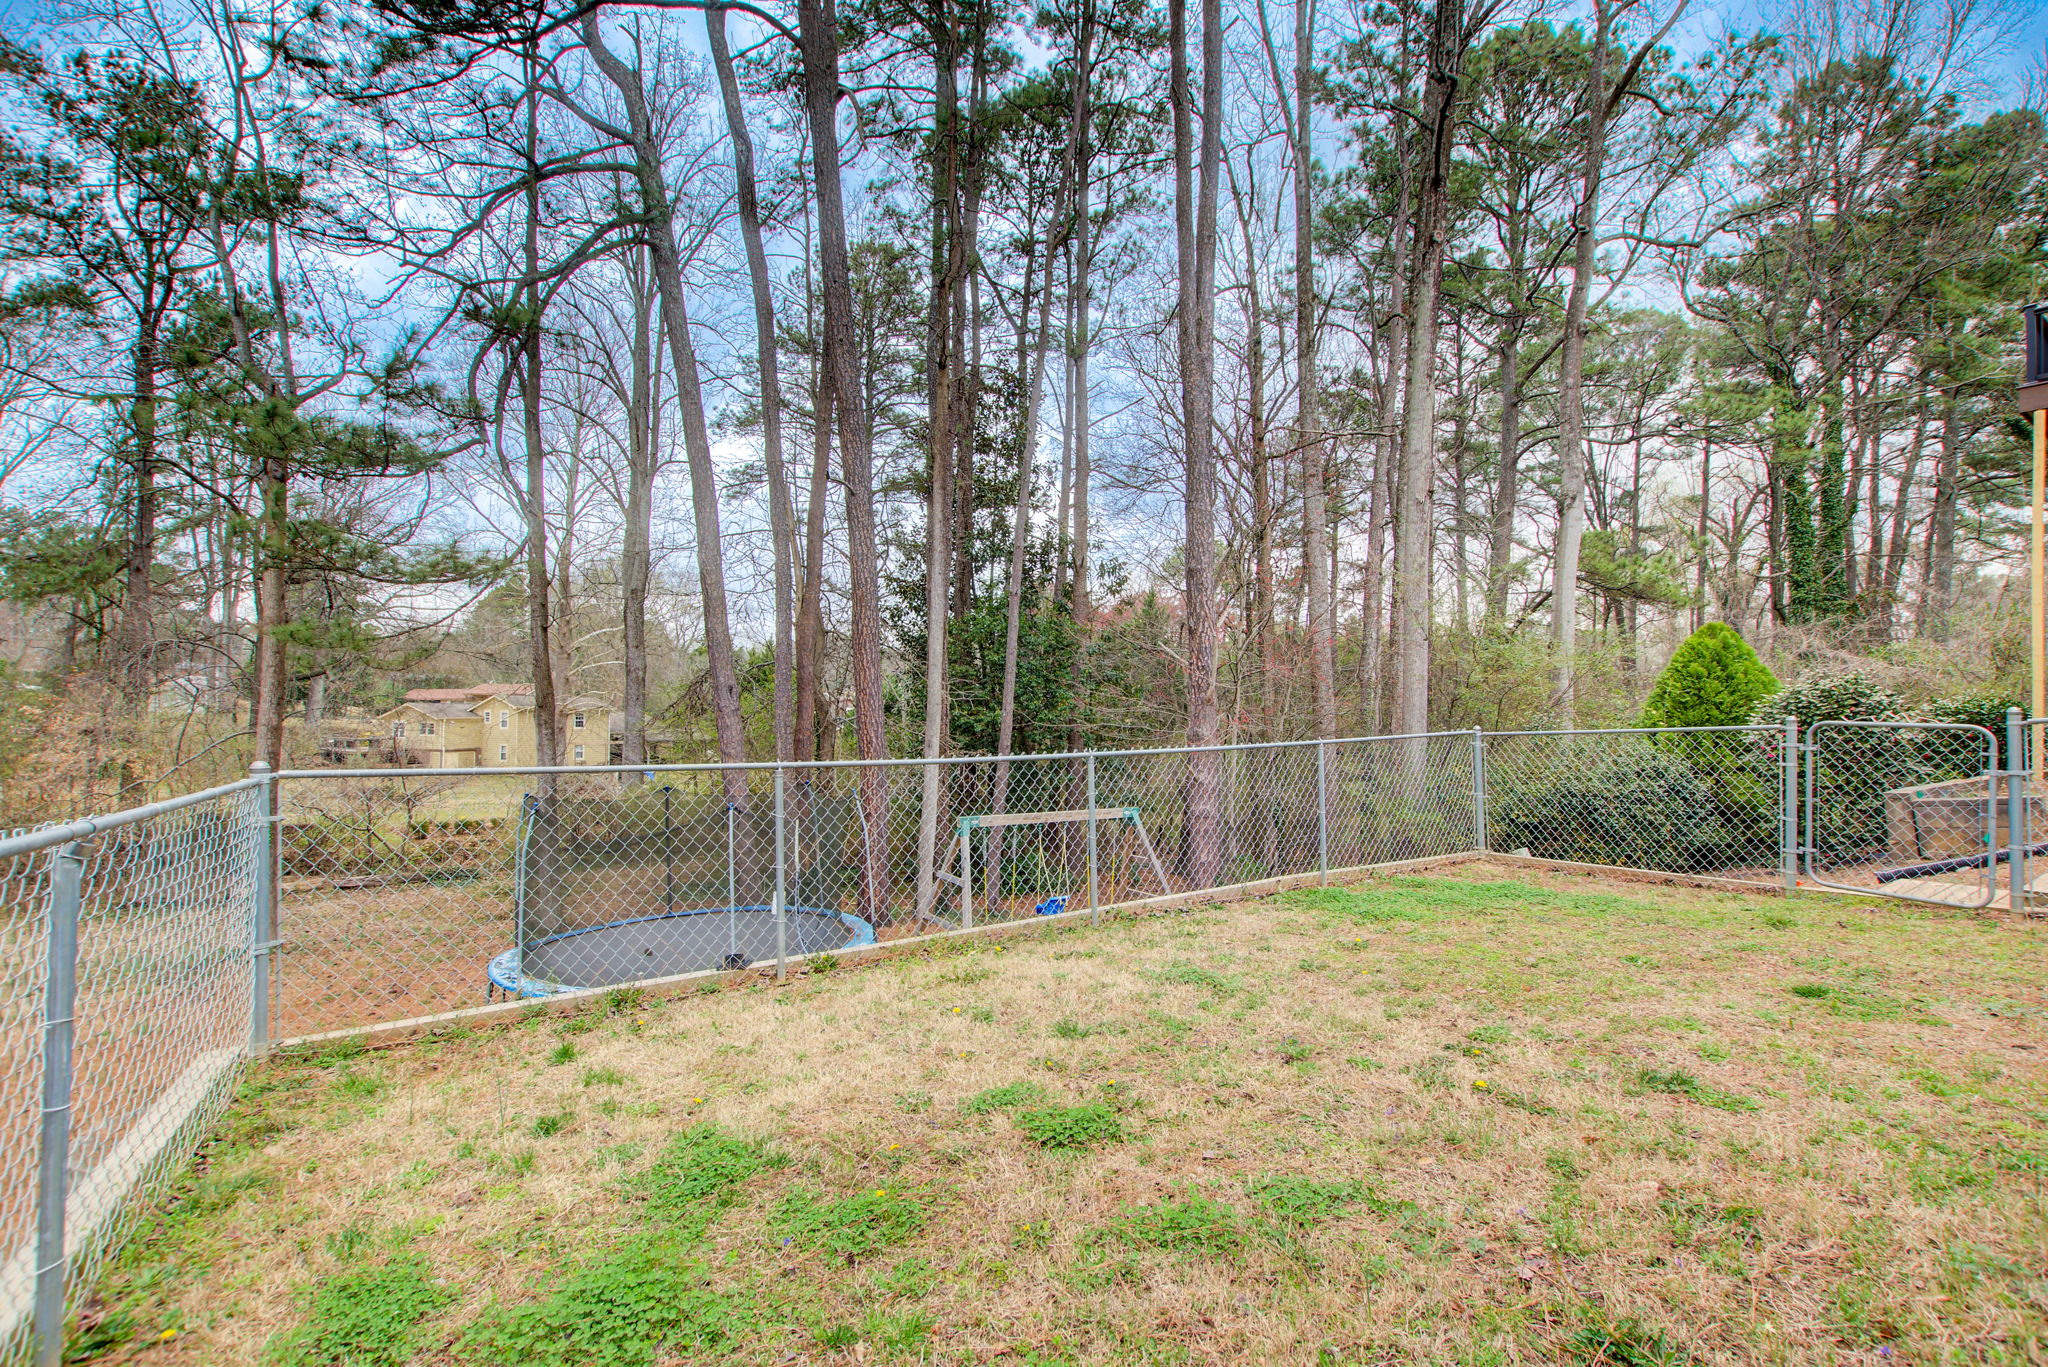 38 Exterior Fenced In Yard w Rear Lot View